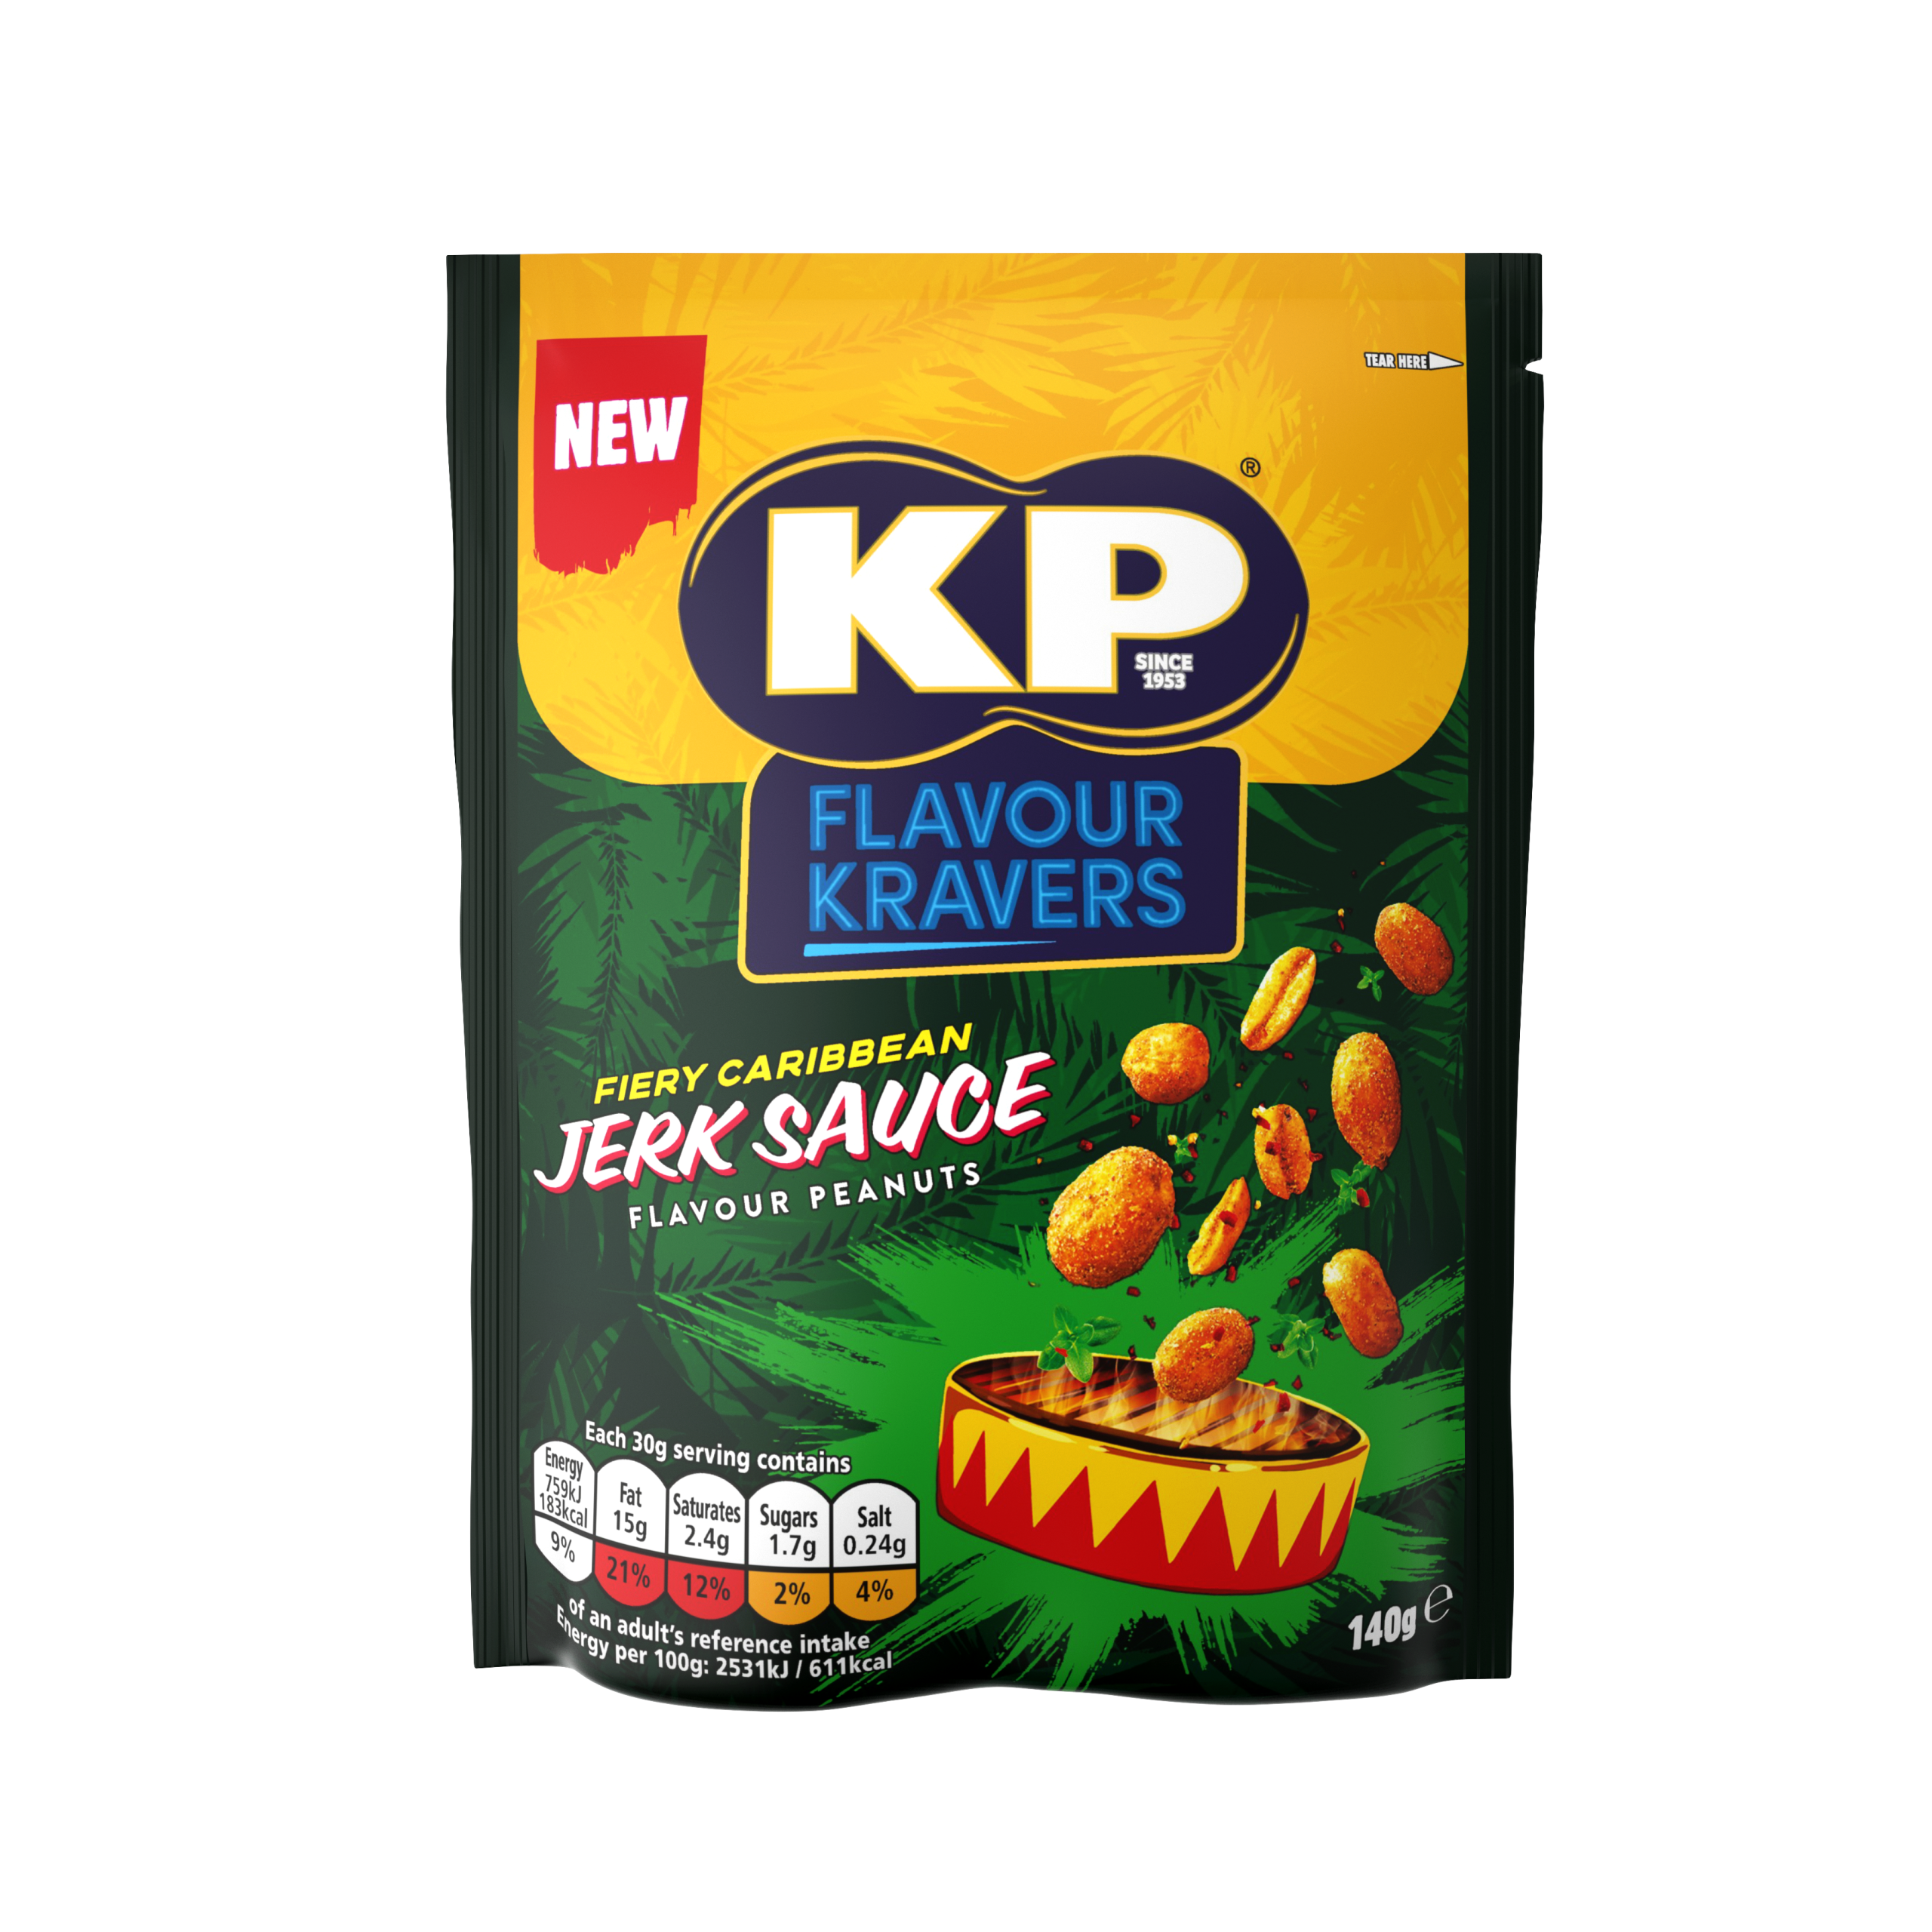 Satisfy your craving with KP Flavour Kravers